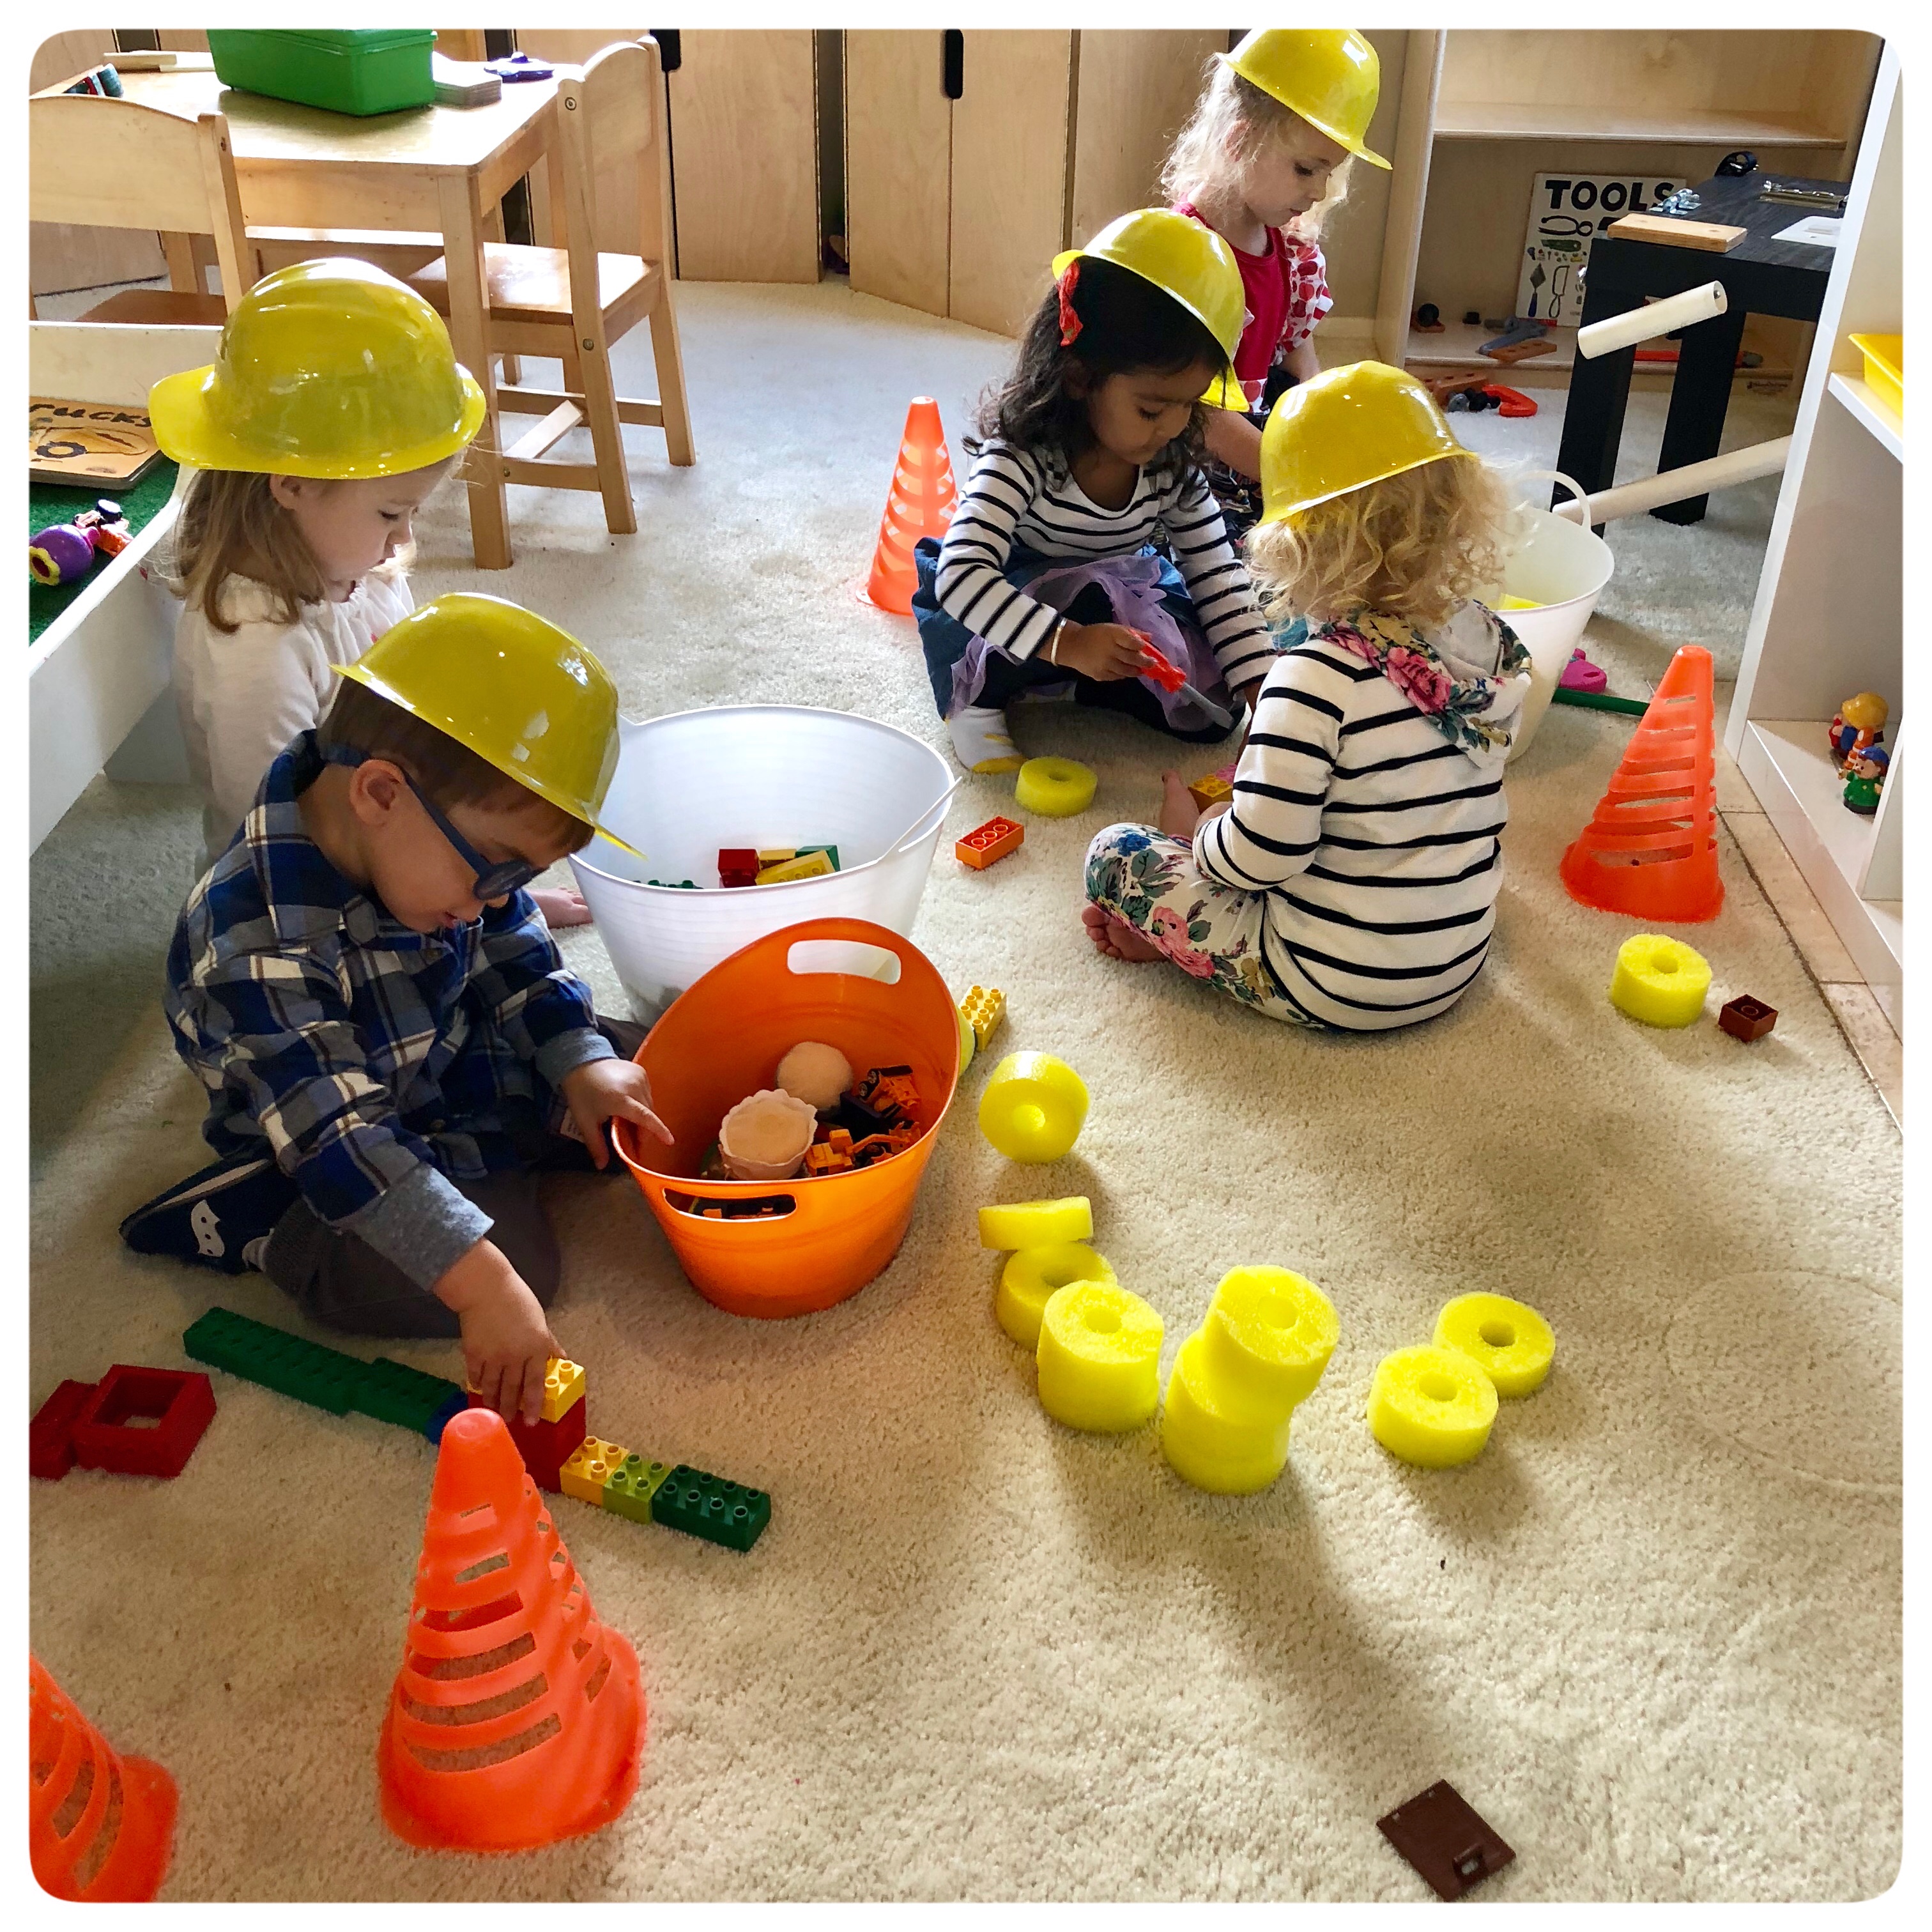 Construction Site!  We will be building math, literacy, science, and social skills during our pretend play.
